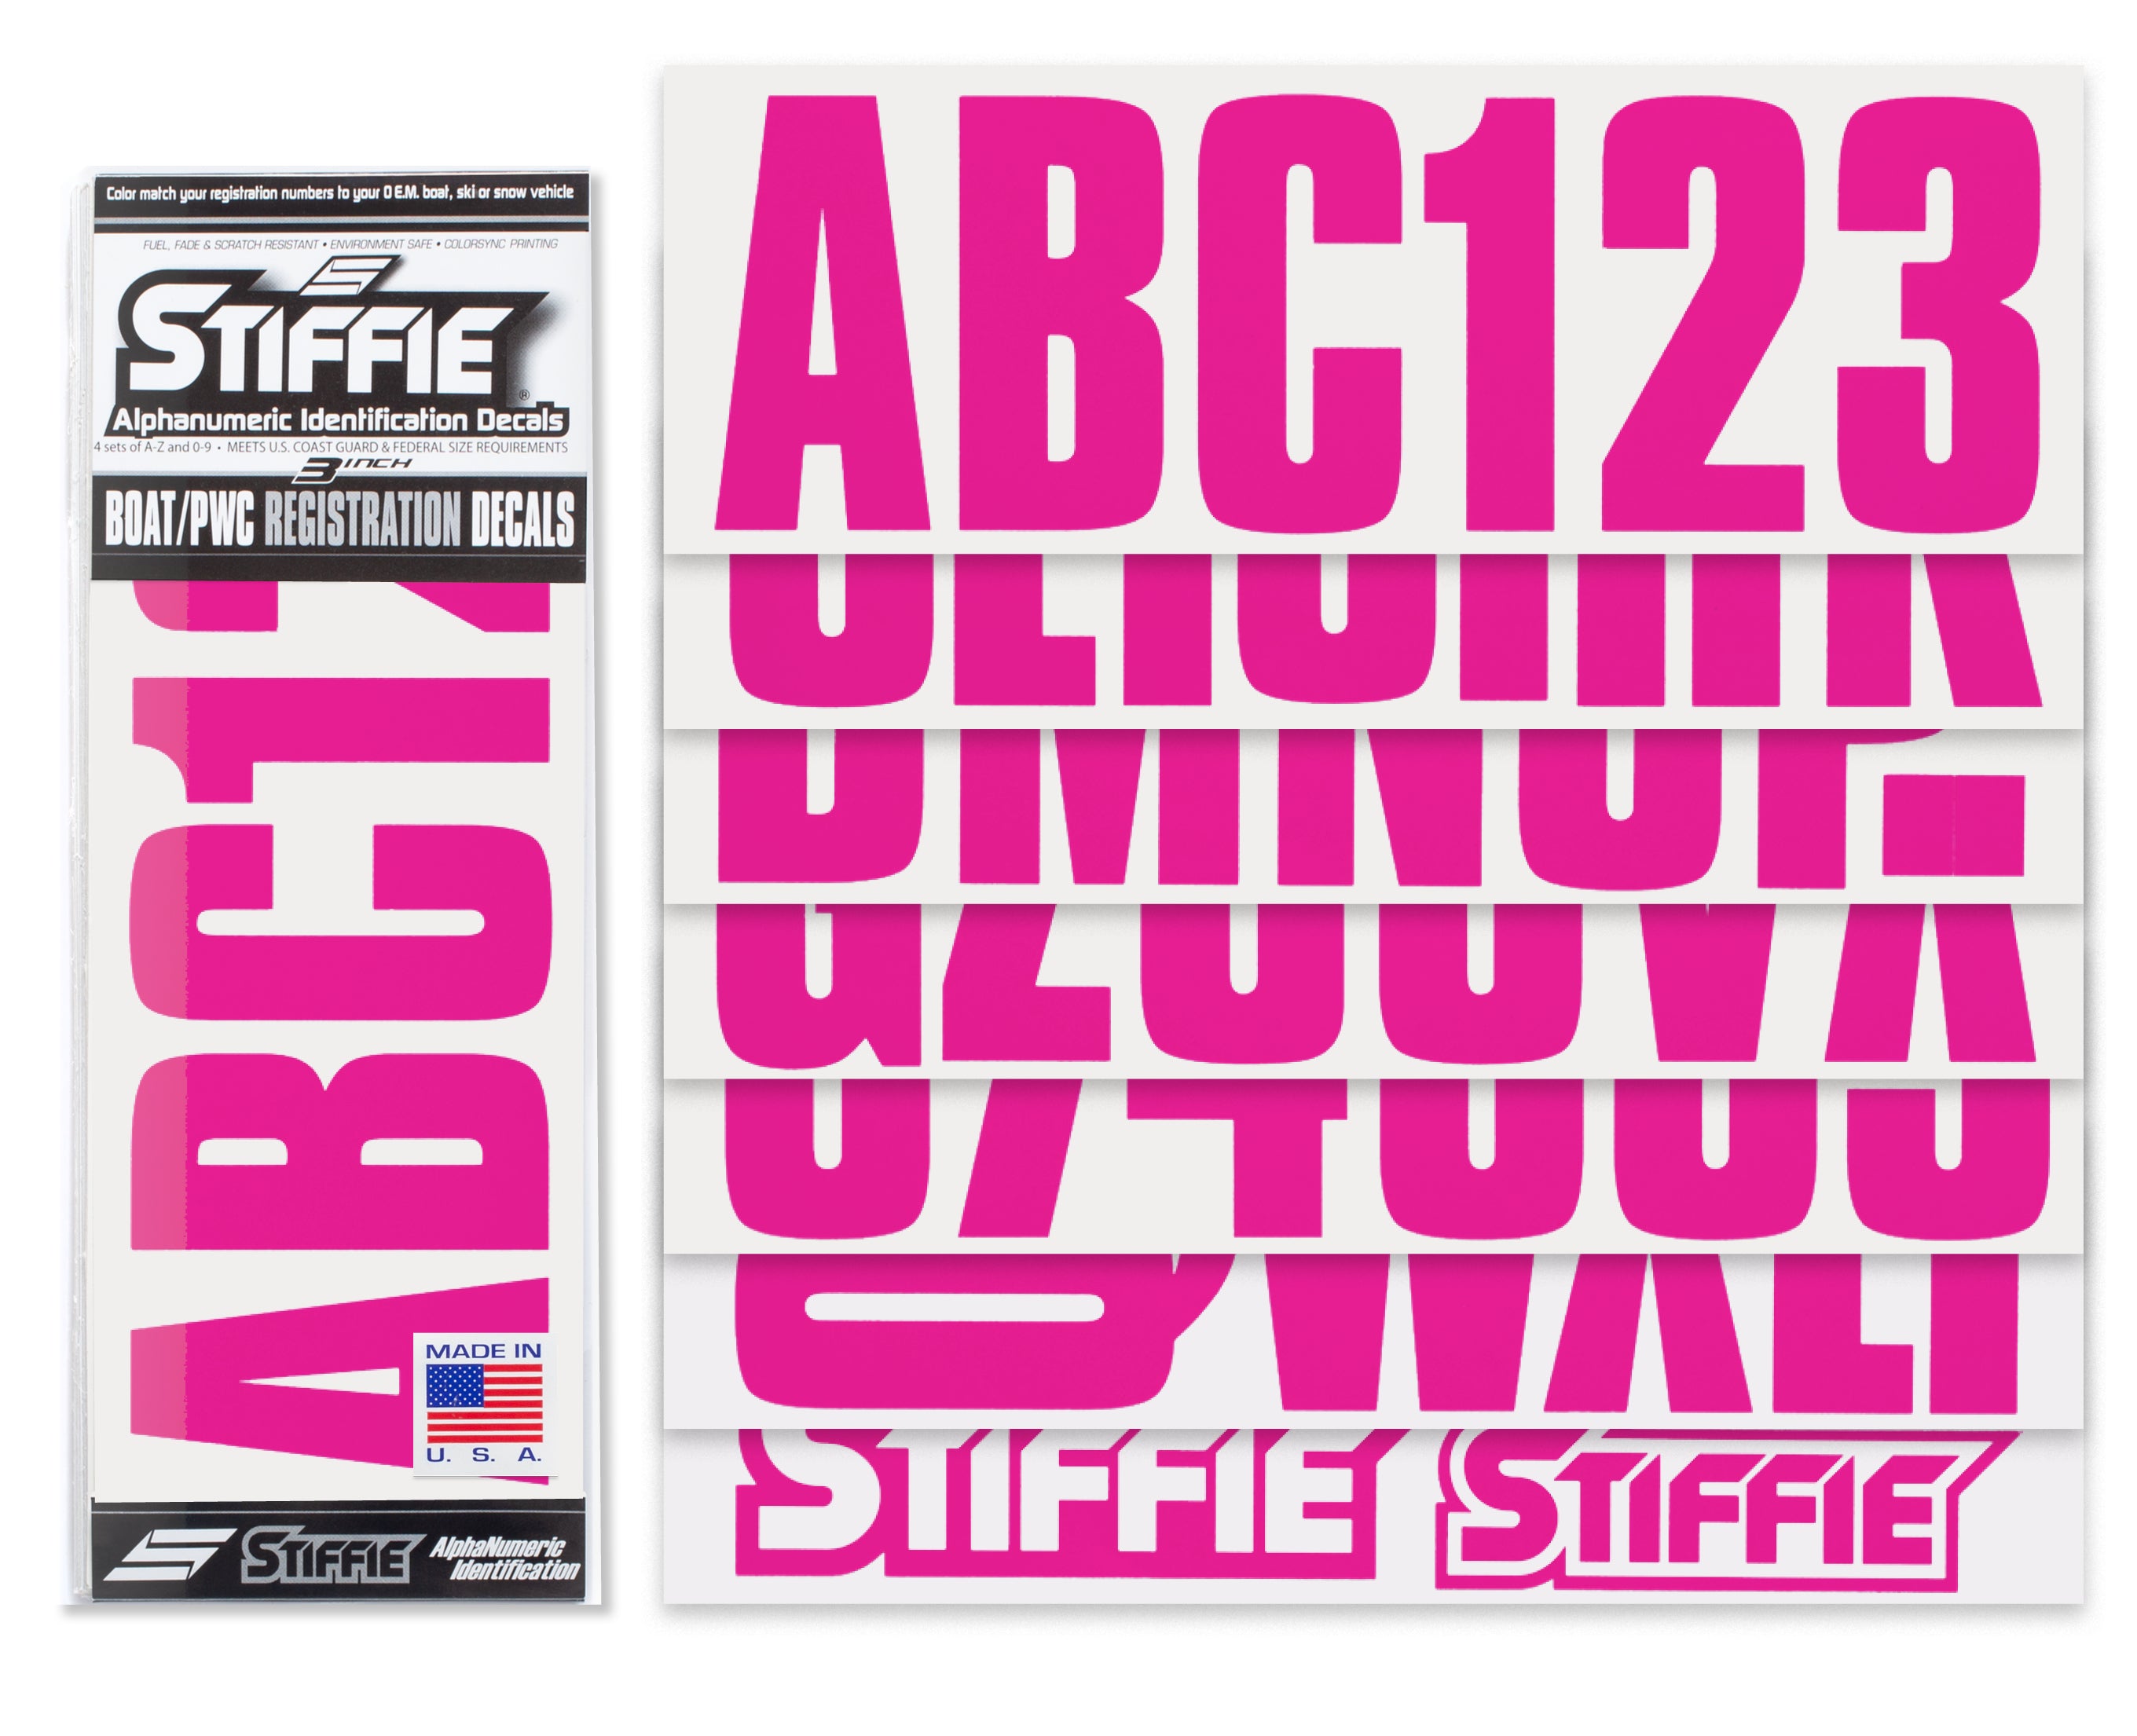 STIFFIE Uniline Berry 3" ID Kit Alpha-Numeric Registration Identification Numbers Stickers Decals for Boats & Personal Watercraft